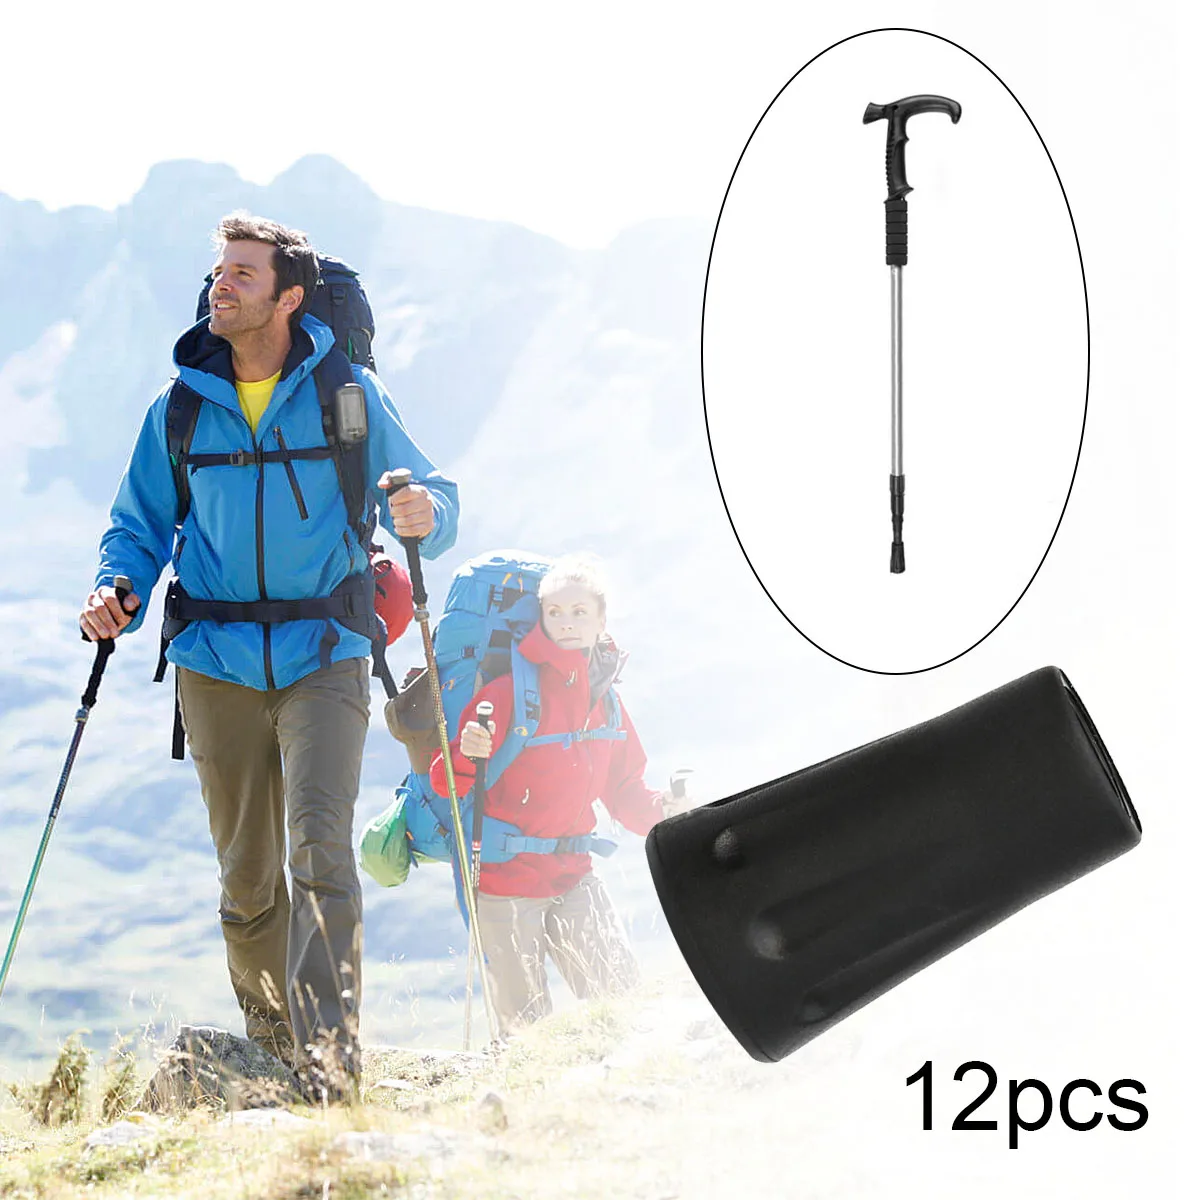 

12Pcs Reinforced Rubber Tip End Cap Outdoor Cover Trekking Pole Protective Hiking Walking Stick Accessories